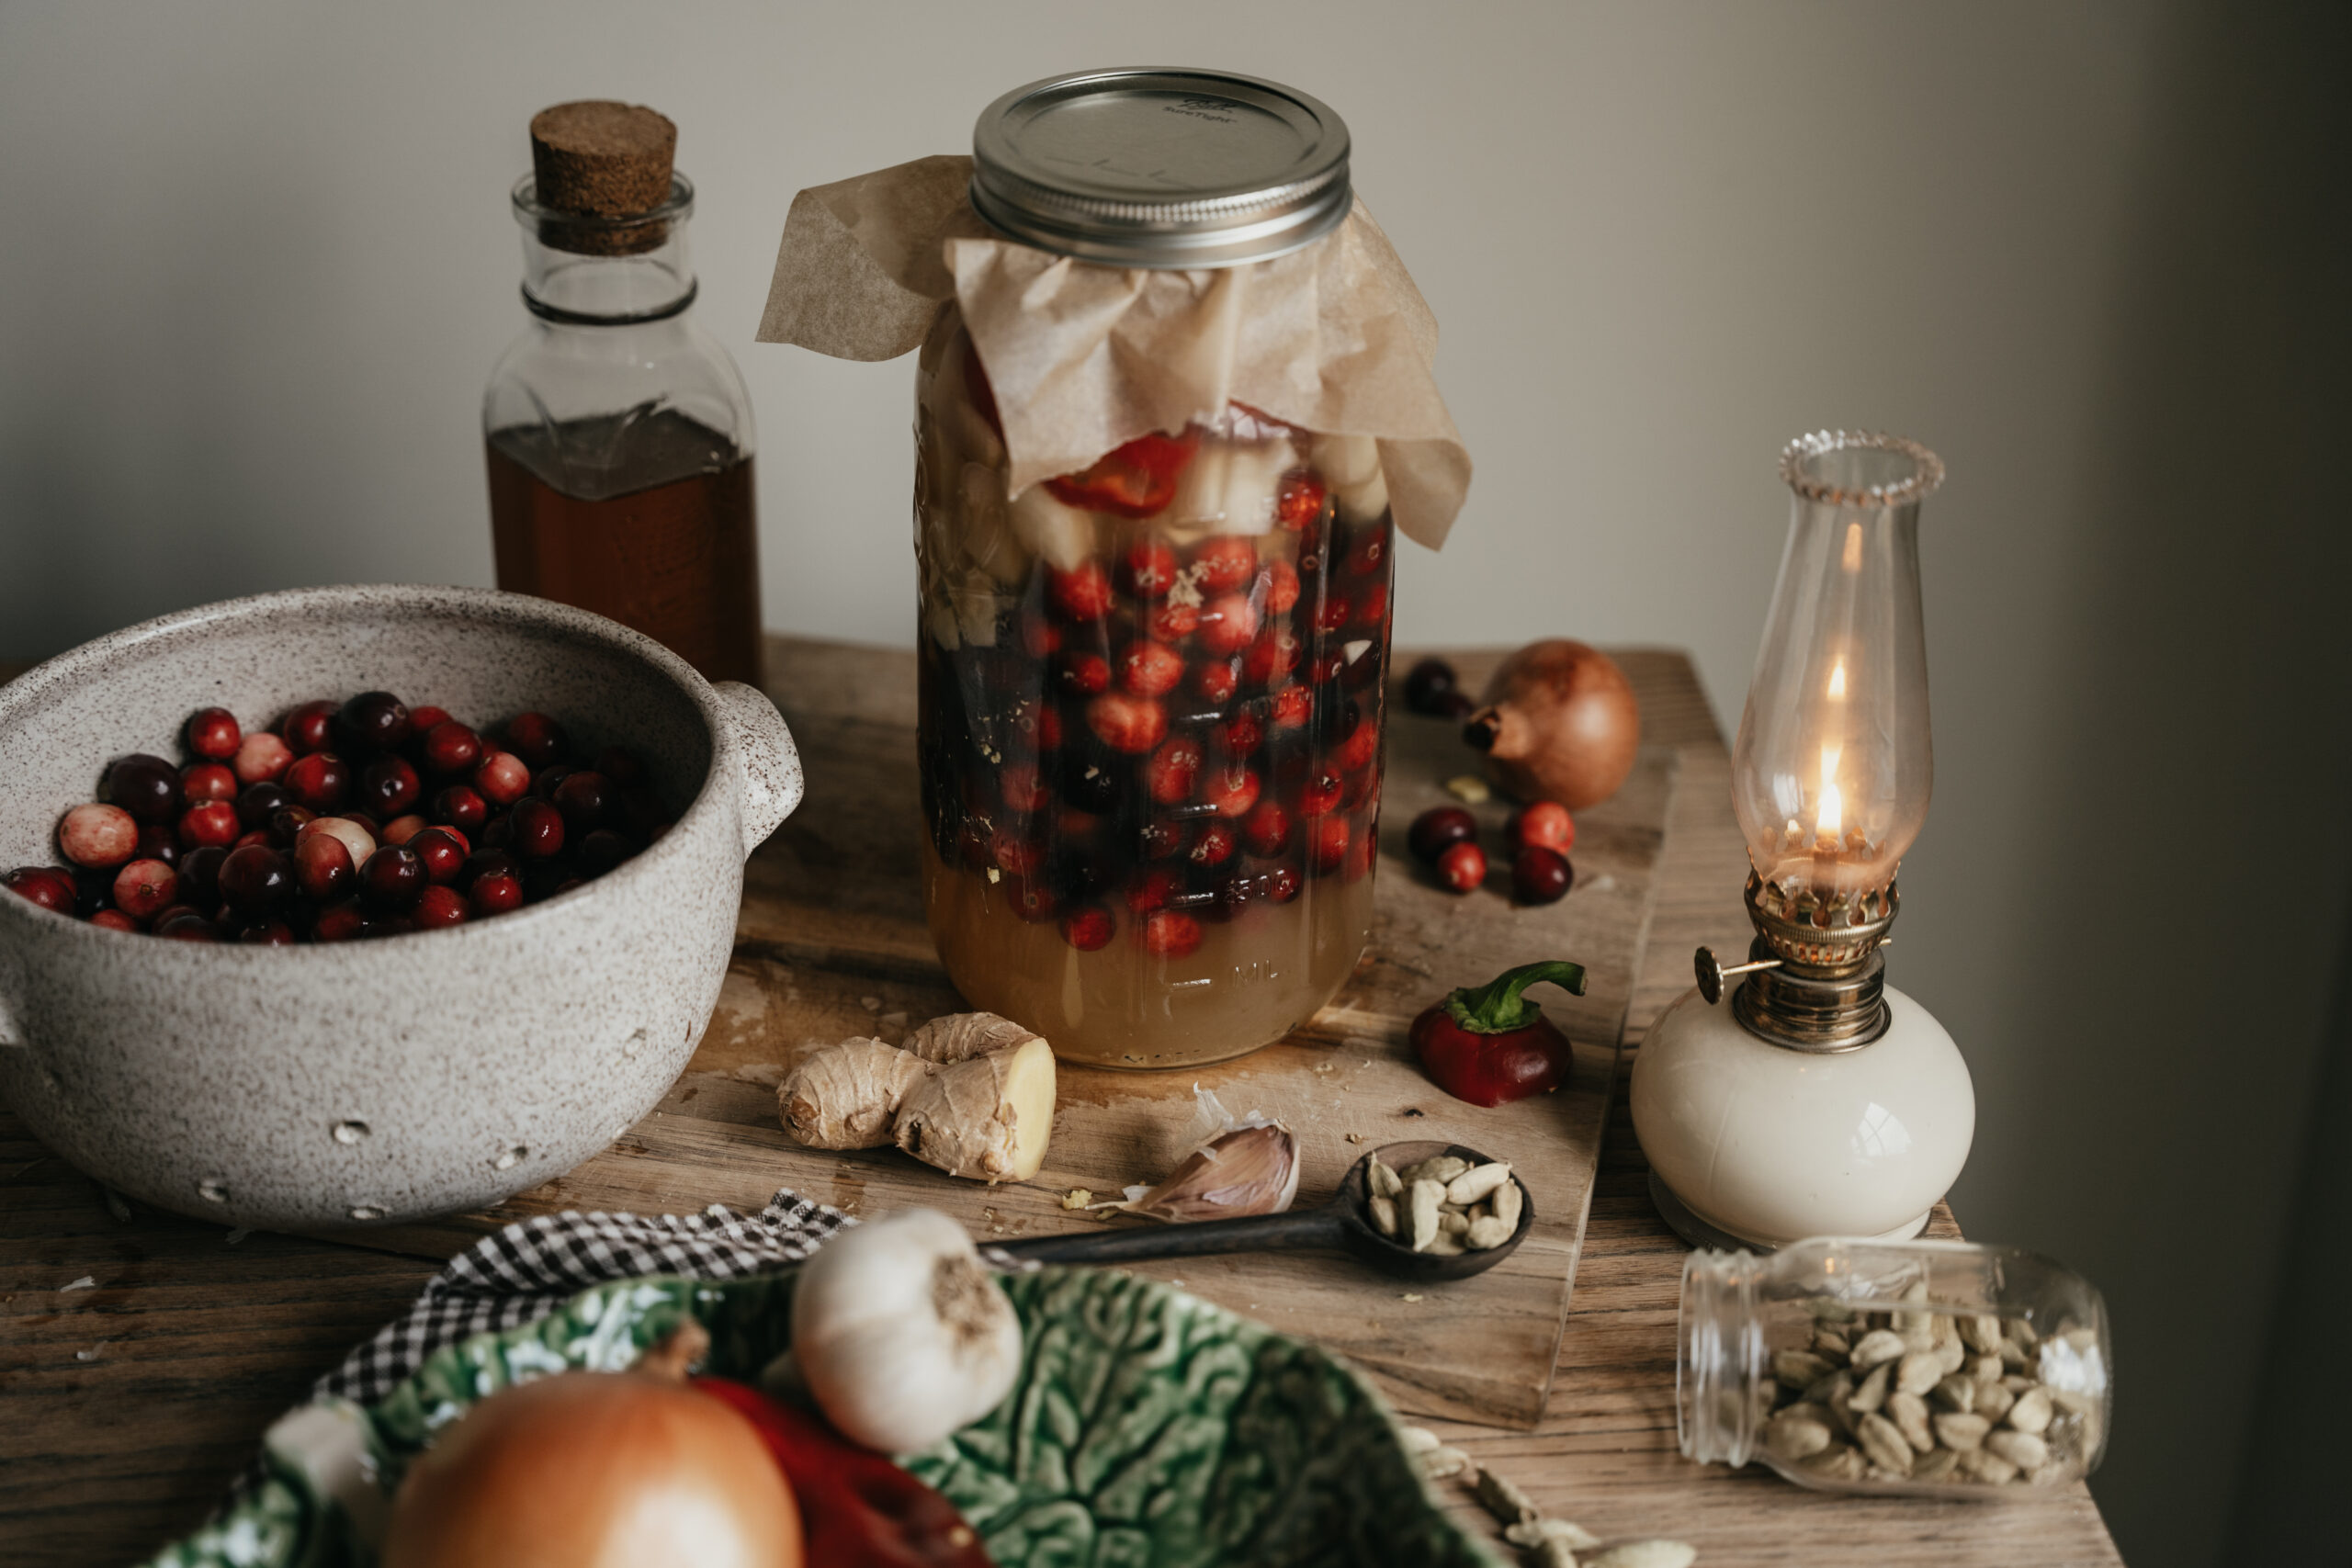 Holiday Stovetop Potpourri Recipe: The Smell of the Season